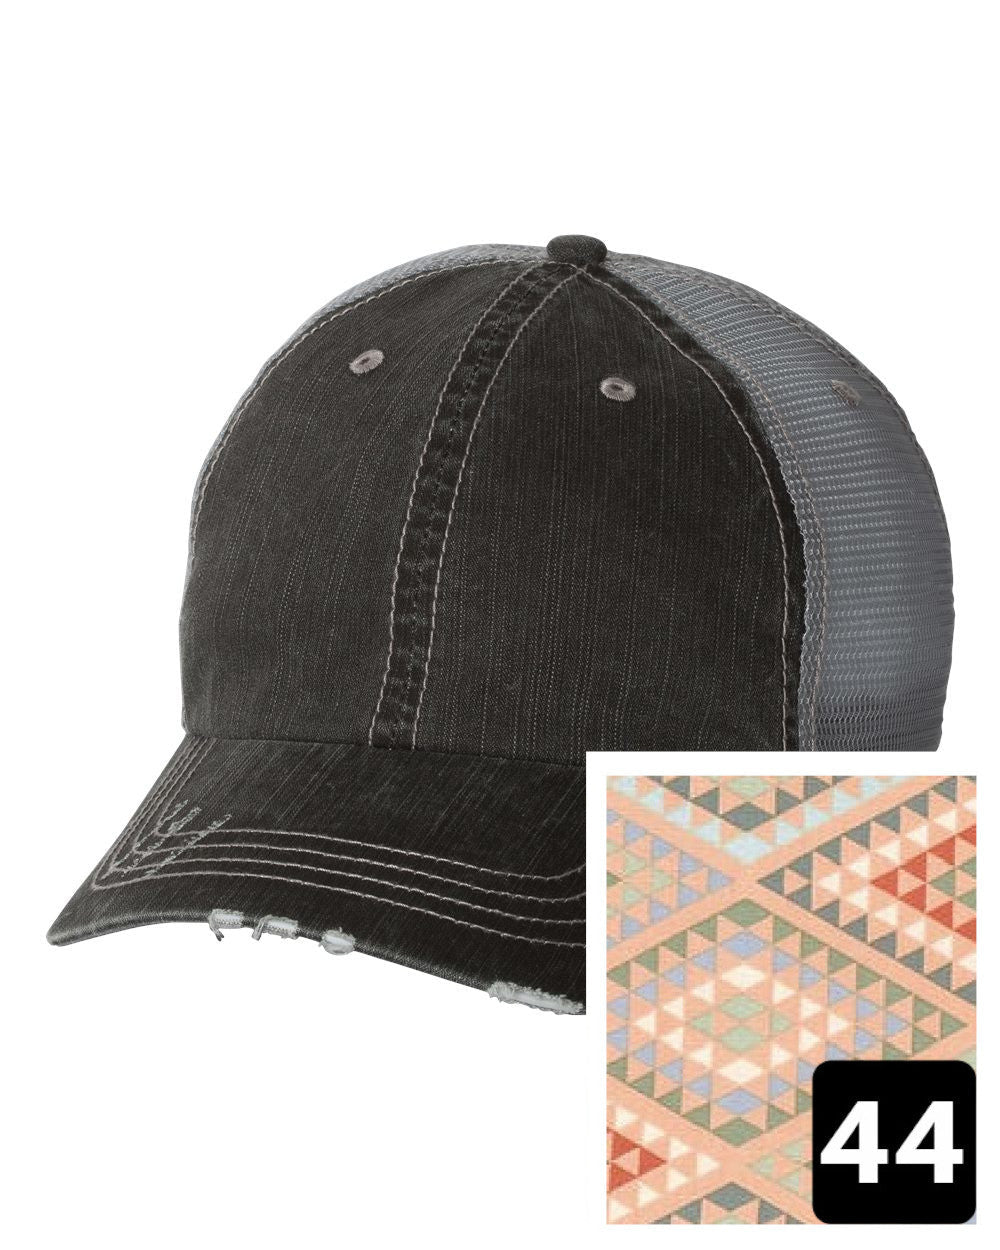 gray distressed trucker hat with navy coral and white chevron fabric state of Alaska